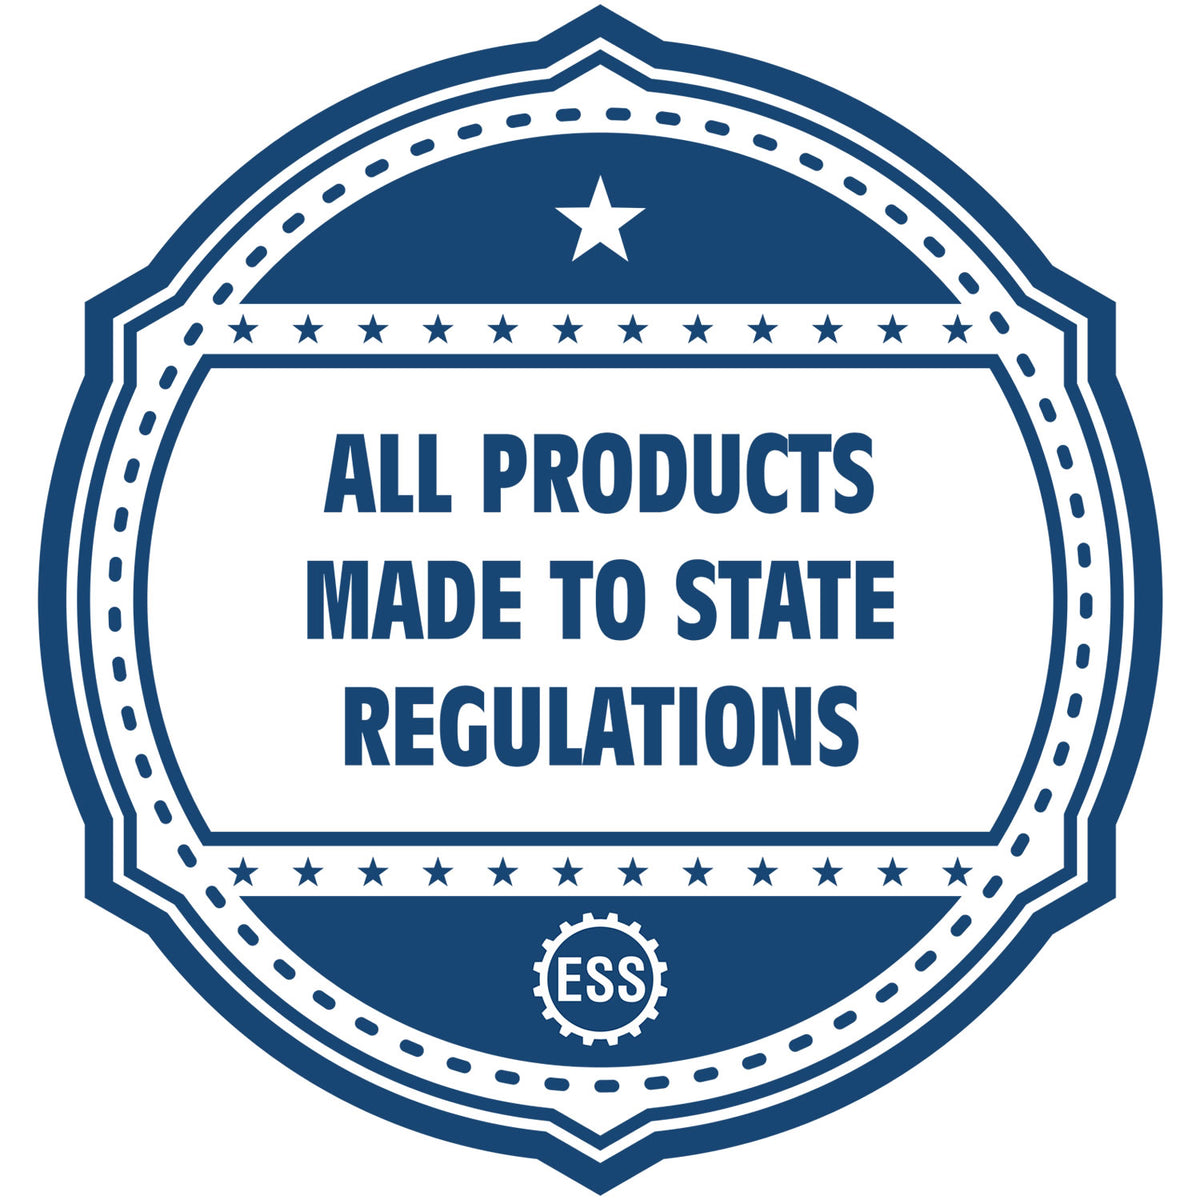 An icon or badge element for the Long Reach Indiana PE Seal showing that this product is made in compliance with state regulations.